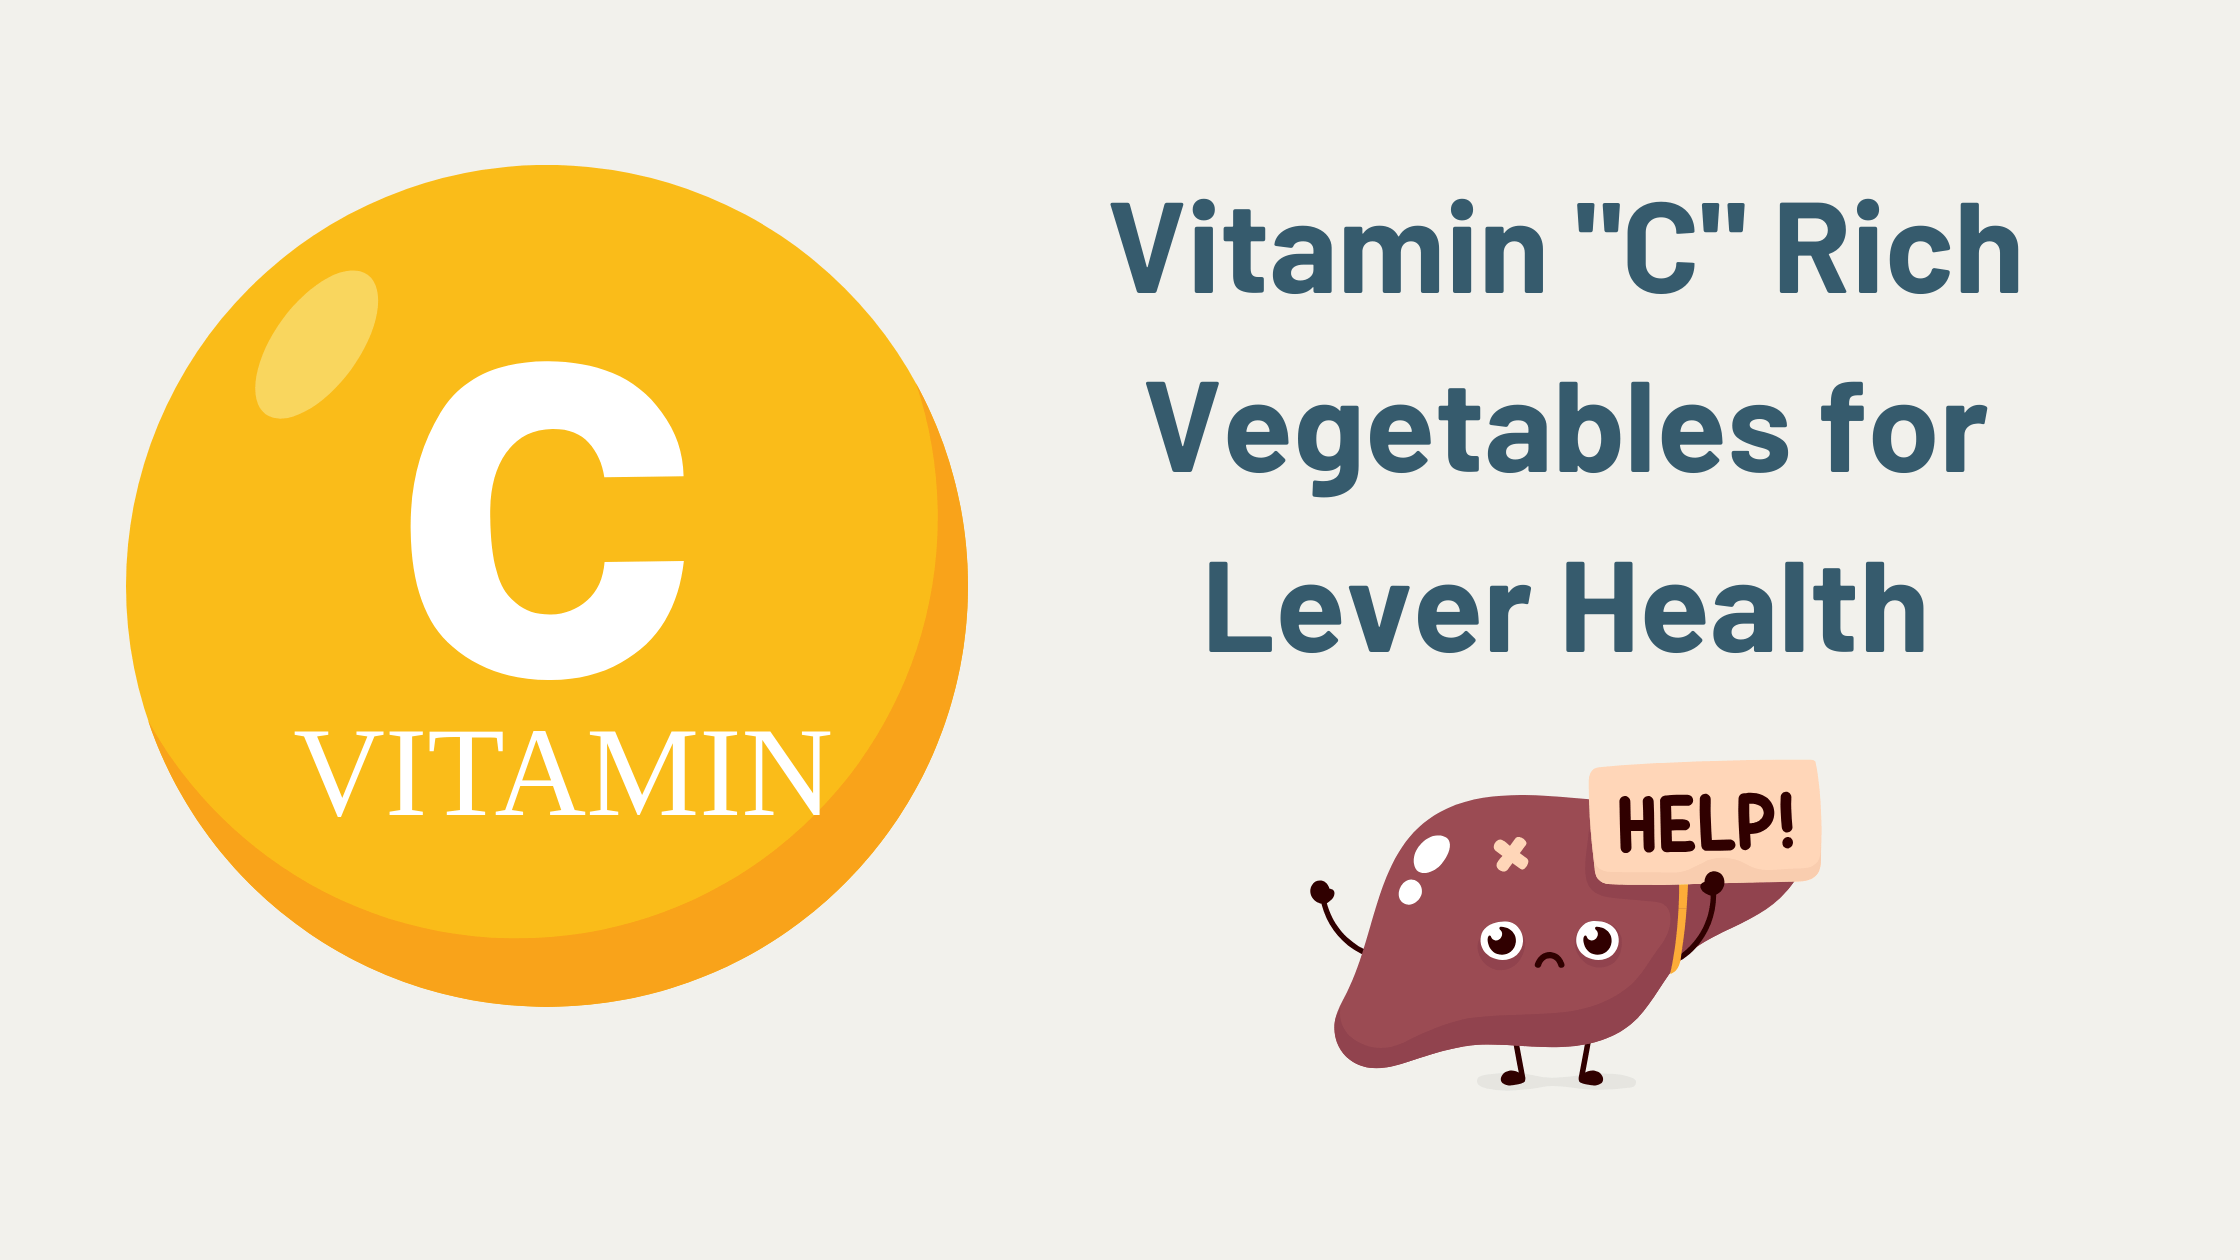 Vitamin "C" Rich Vegetables for Lever Health